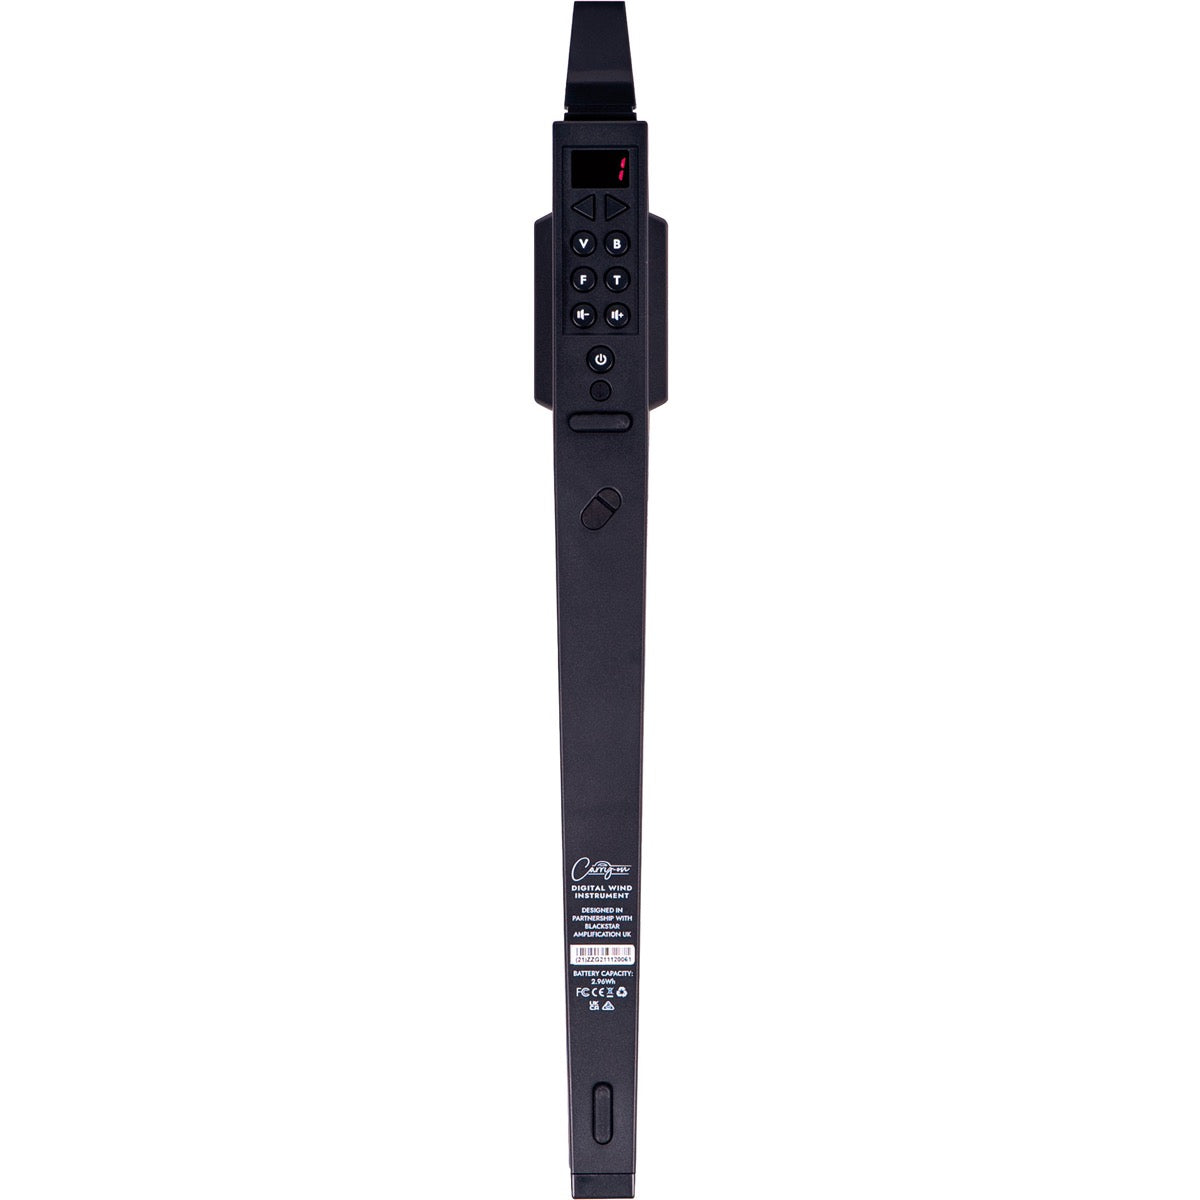 Carry-On Digital Wind Instrument - Black View 2